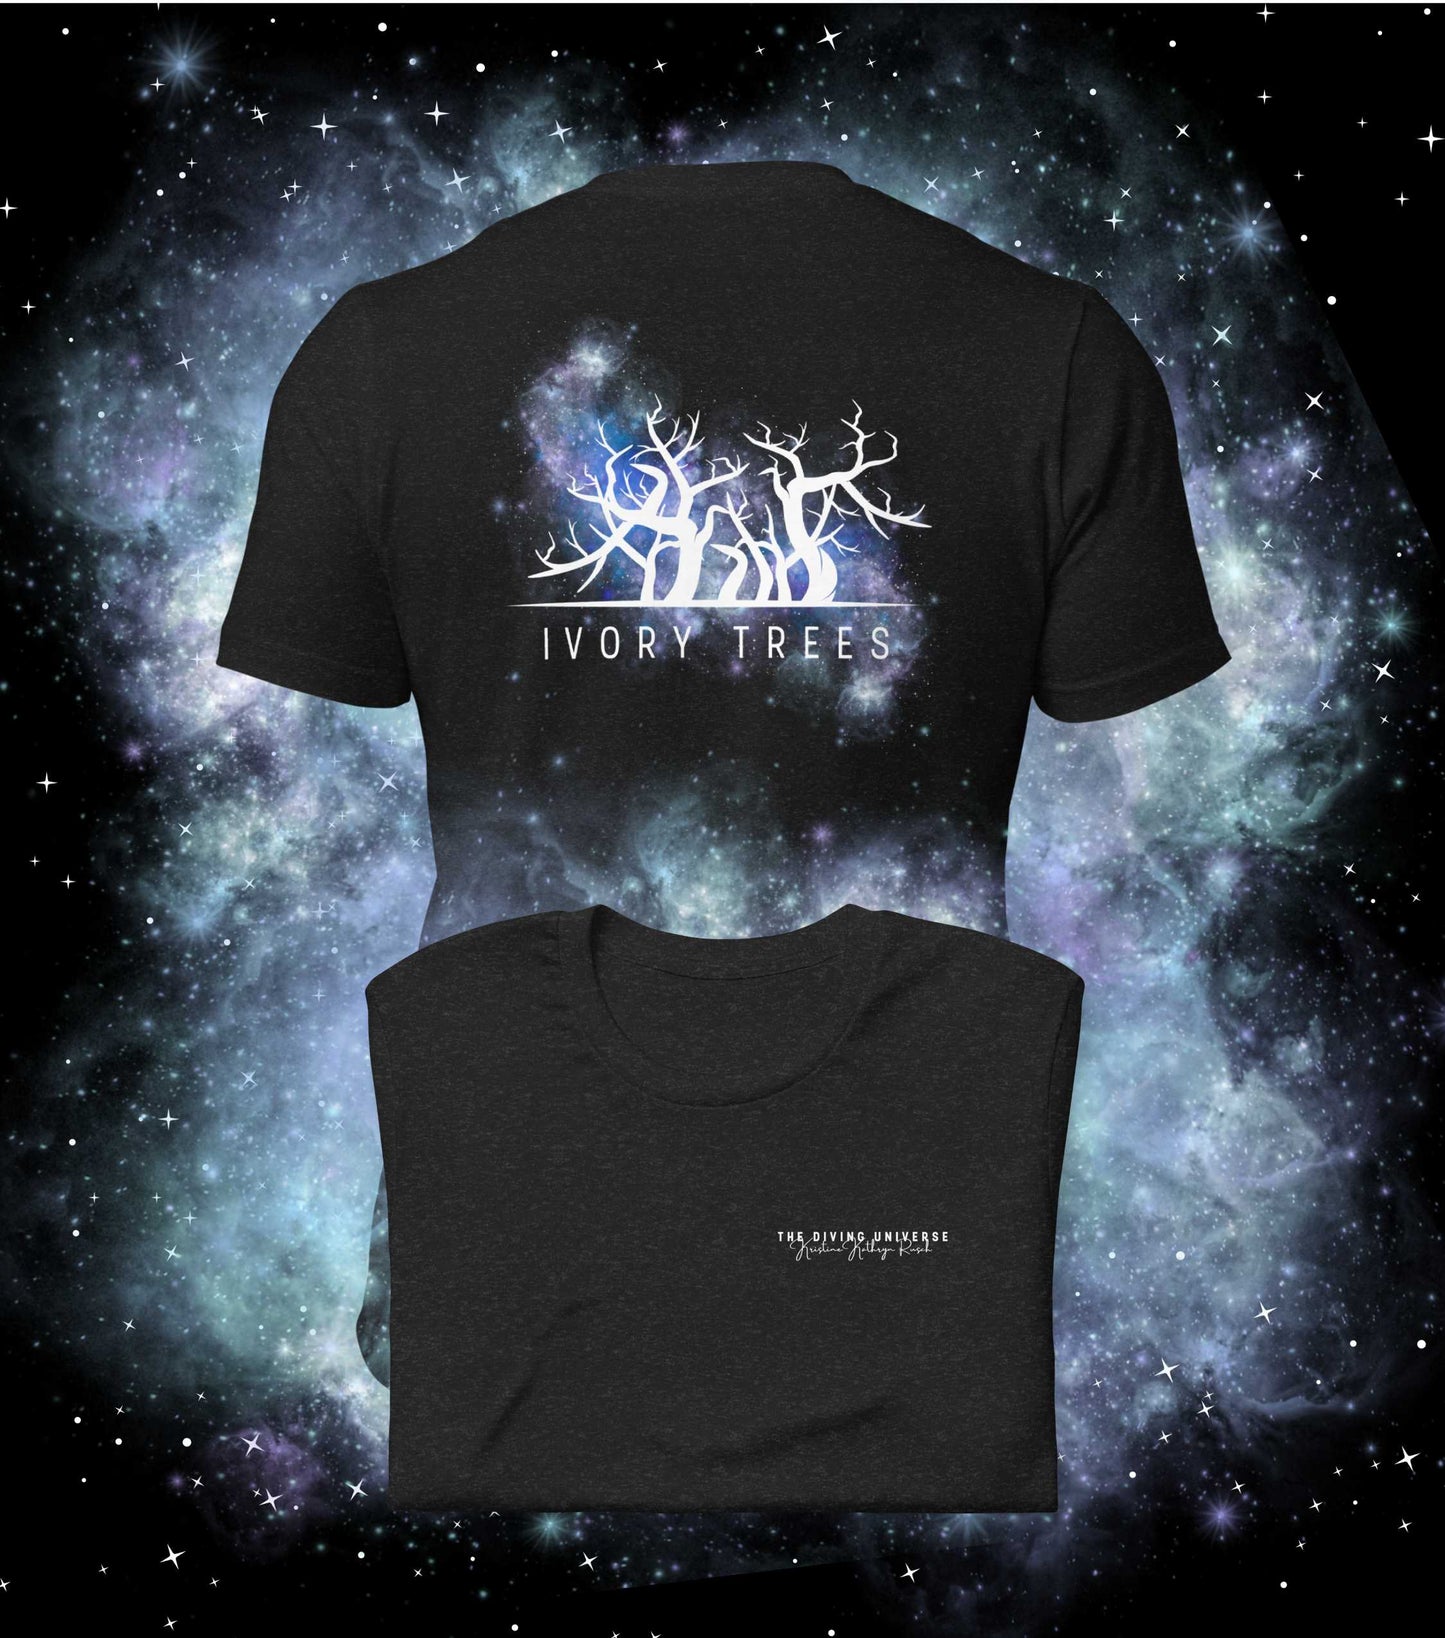 IVORY TREES NEBULA & Logo T-Shirt - The Diving Universe by Kristine Kathryn Rusch